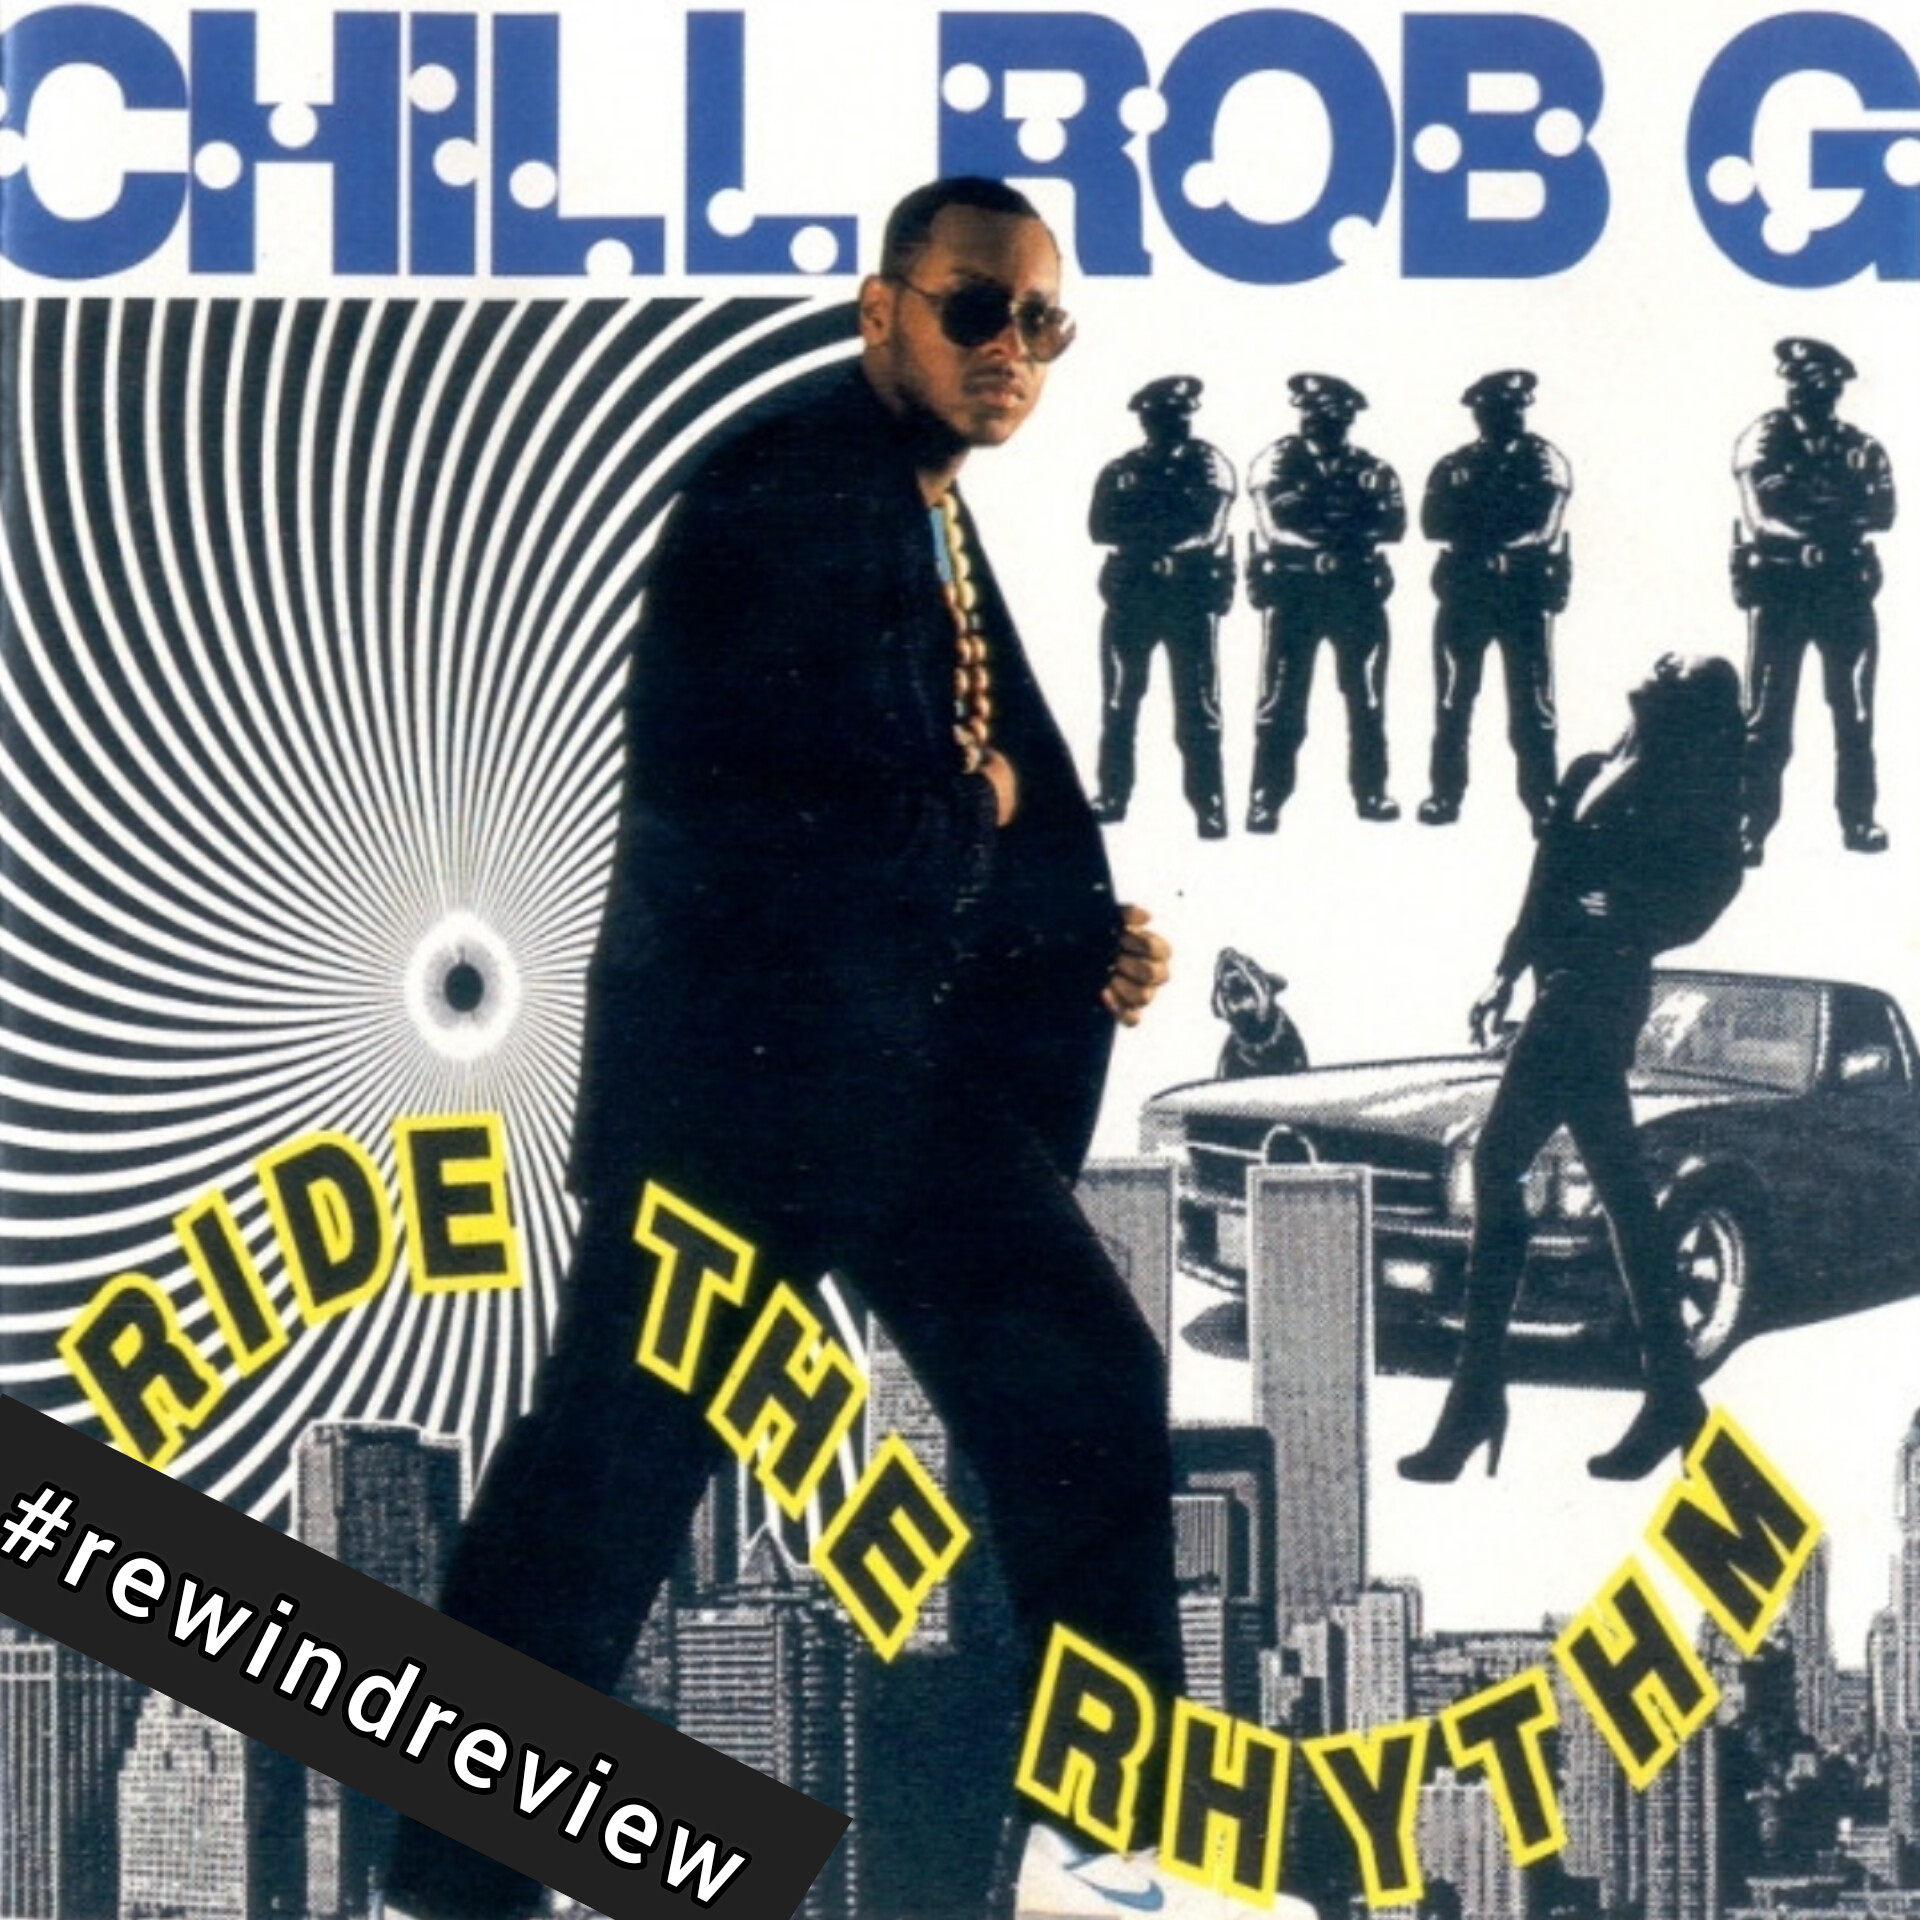 #rewindreview: Chill Rob G. ‘Ride The Rhythm’ 1990